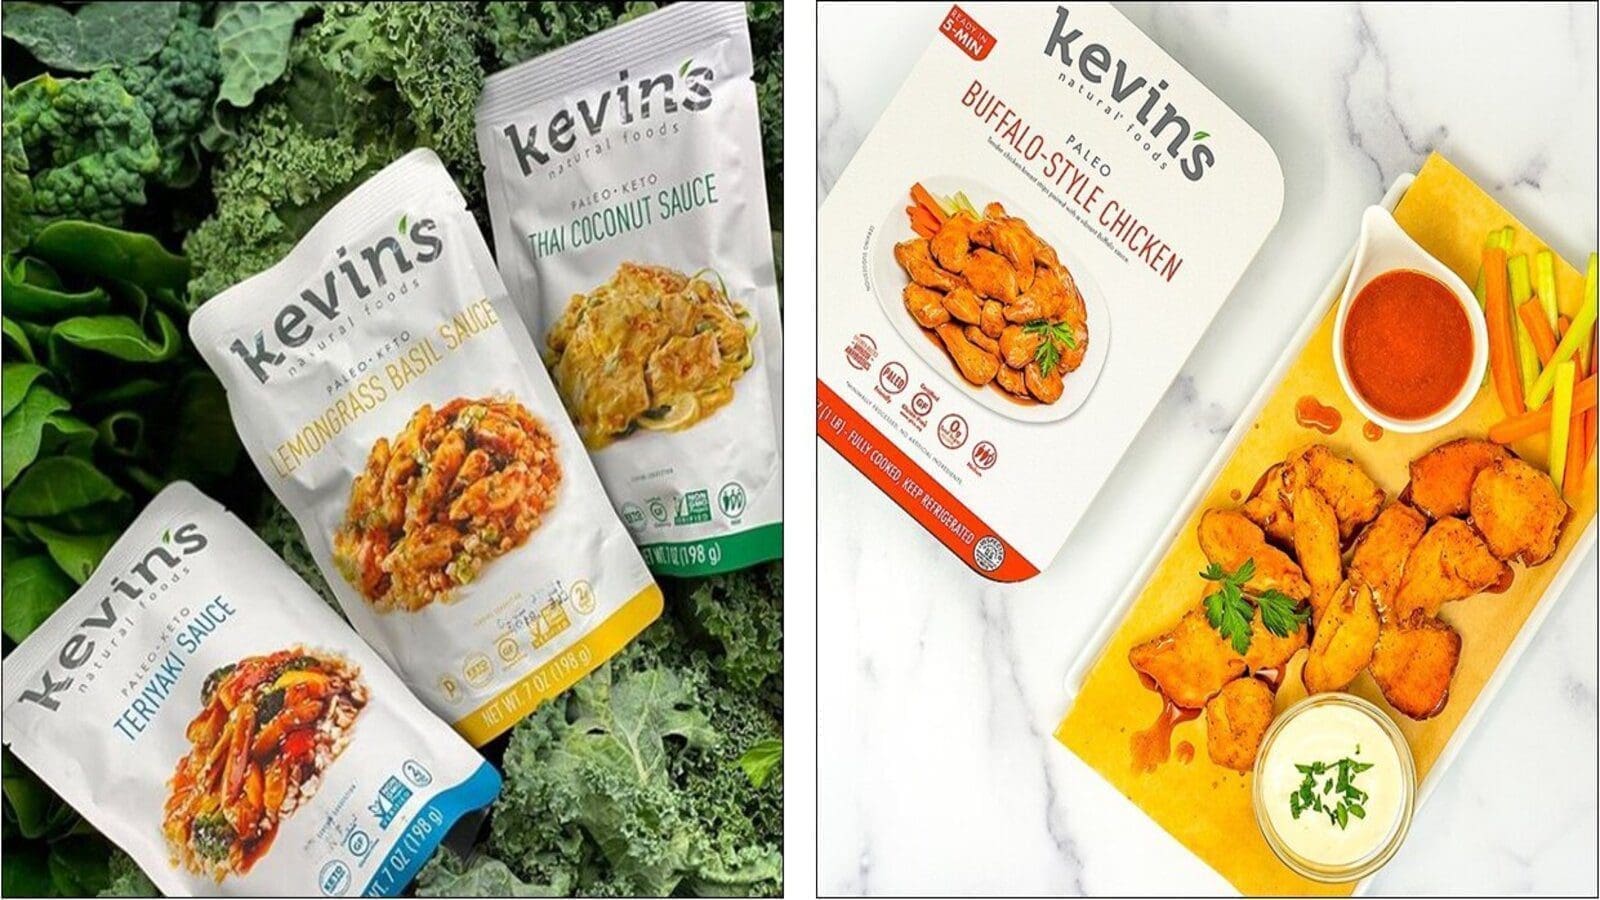 Mars to expand into healthy food segment with acquisition of Kevin’s Natural Foods